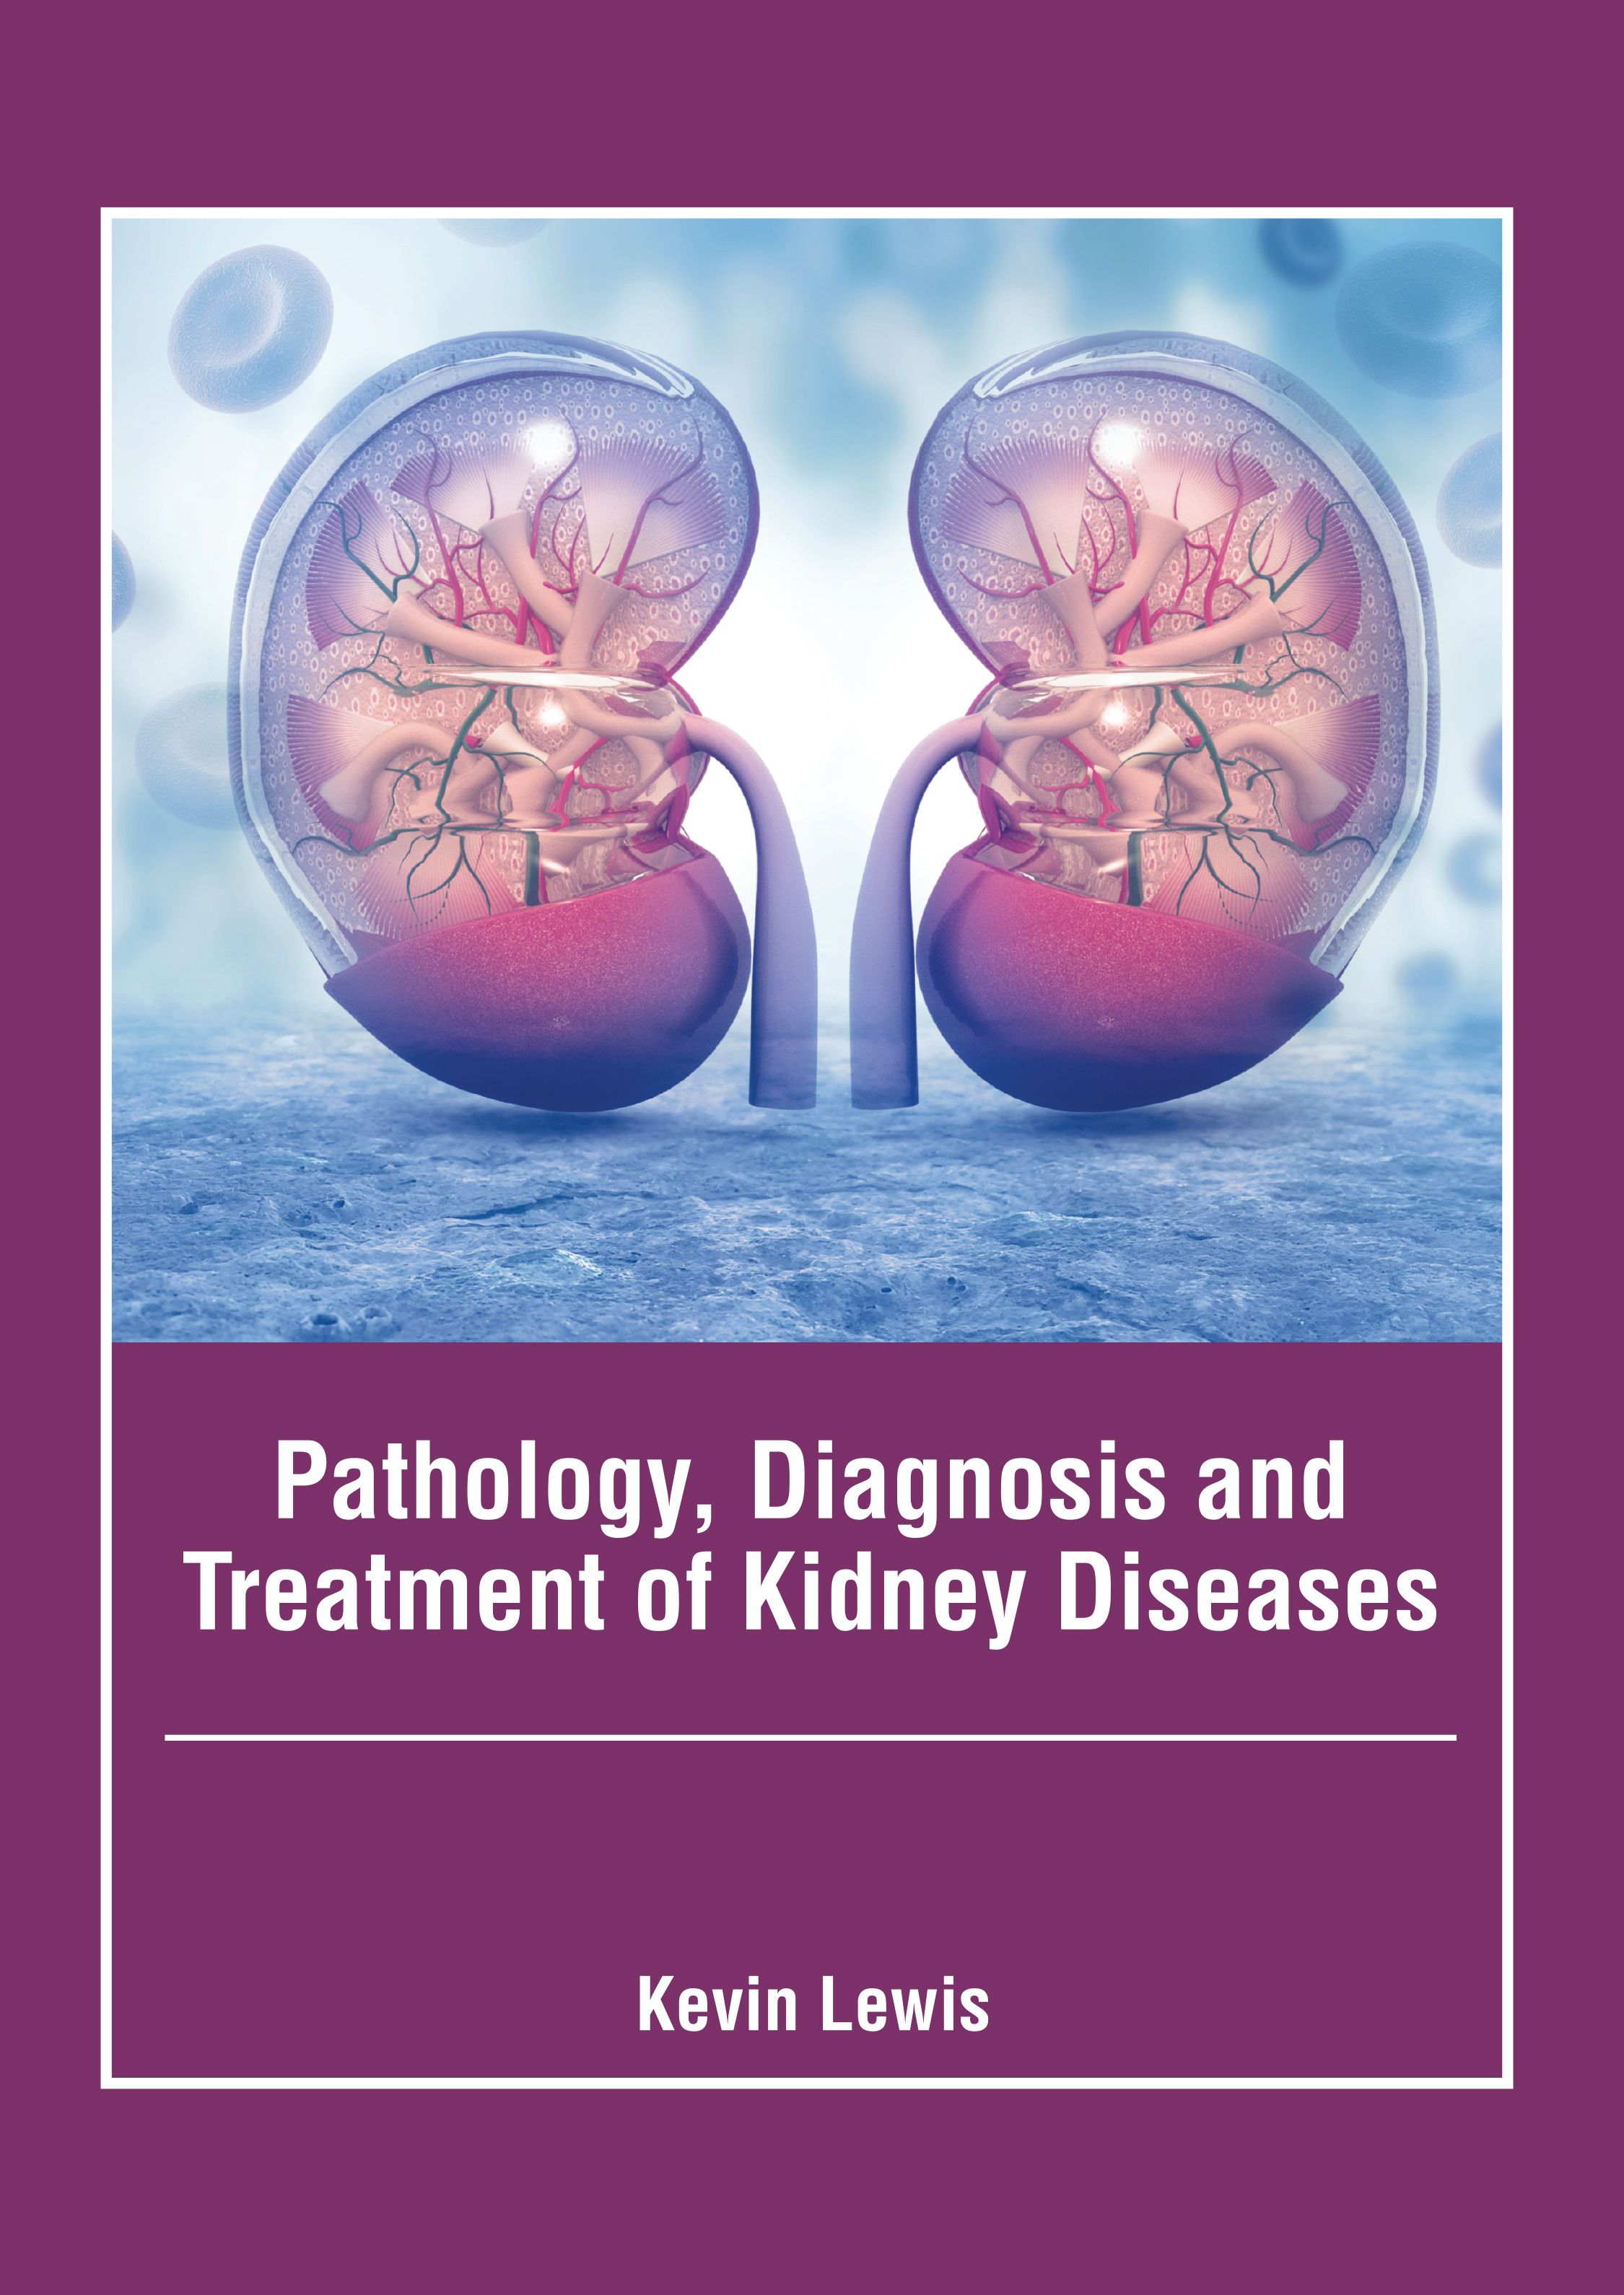 

exclusive-publishers/american-medical-publishers/pathology-diagnosis-and-treatment-of-kidney-diseases-9781639277117